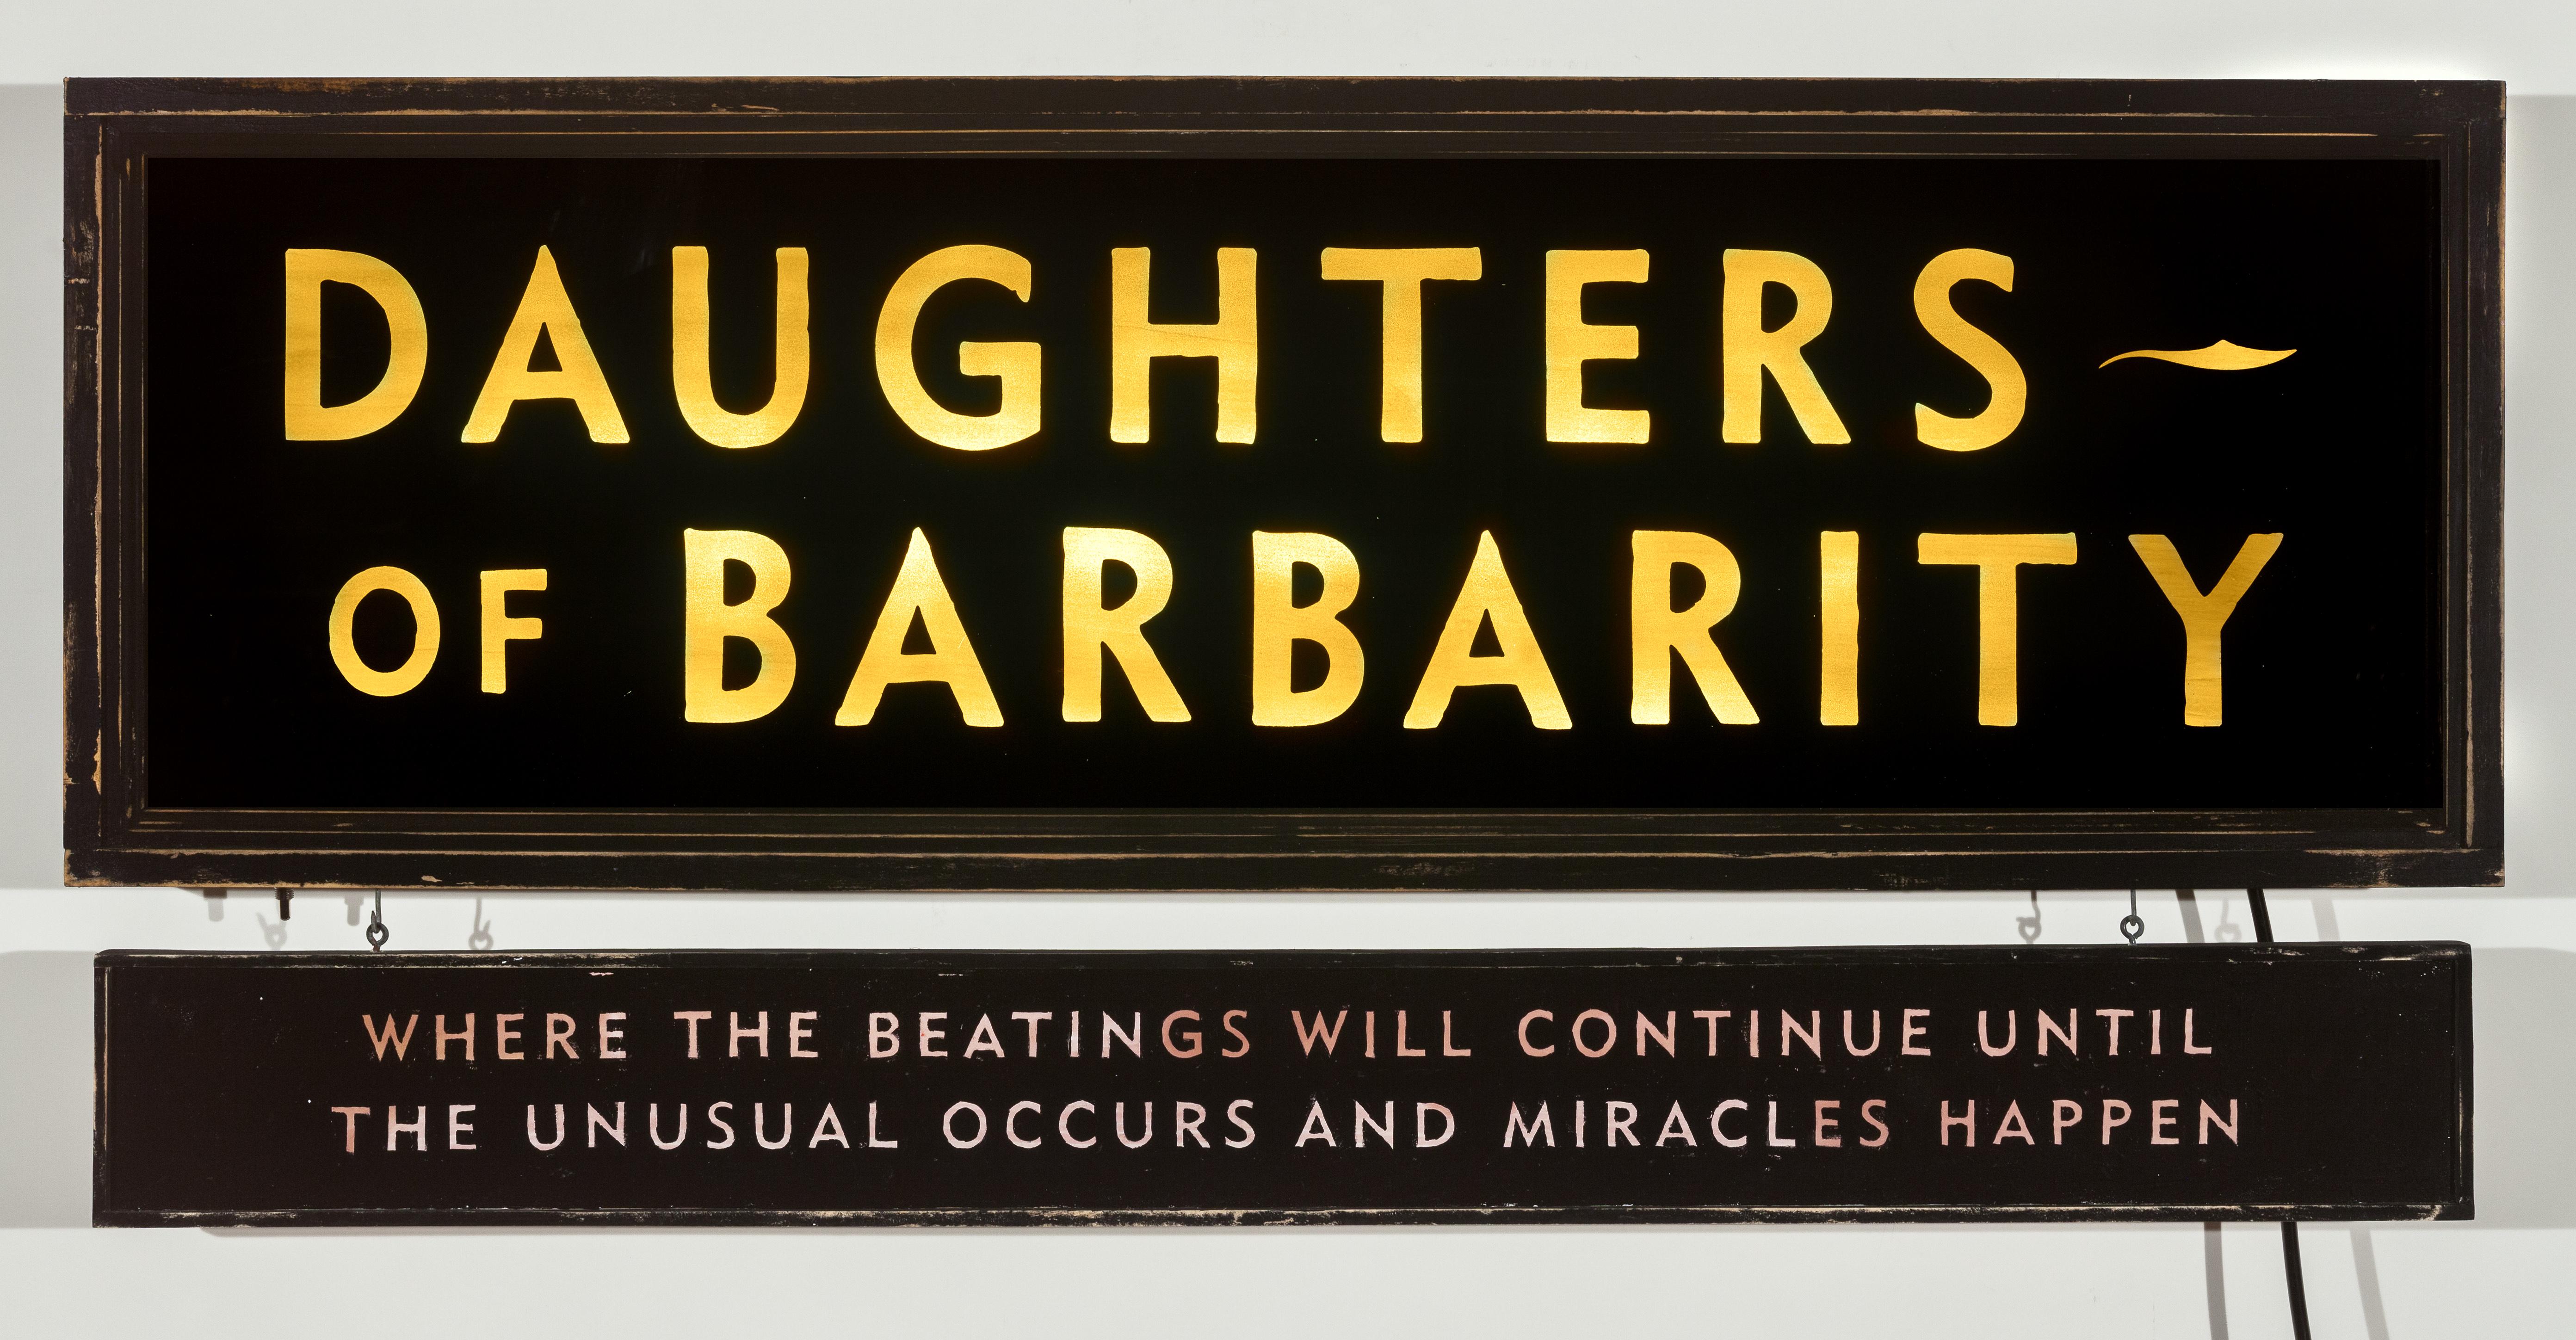 Daughters of Barbarity (lighted sign)